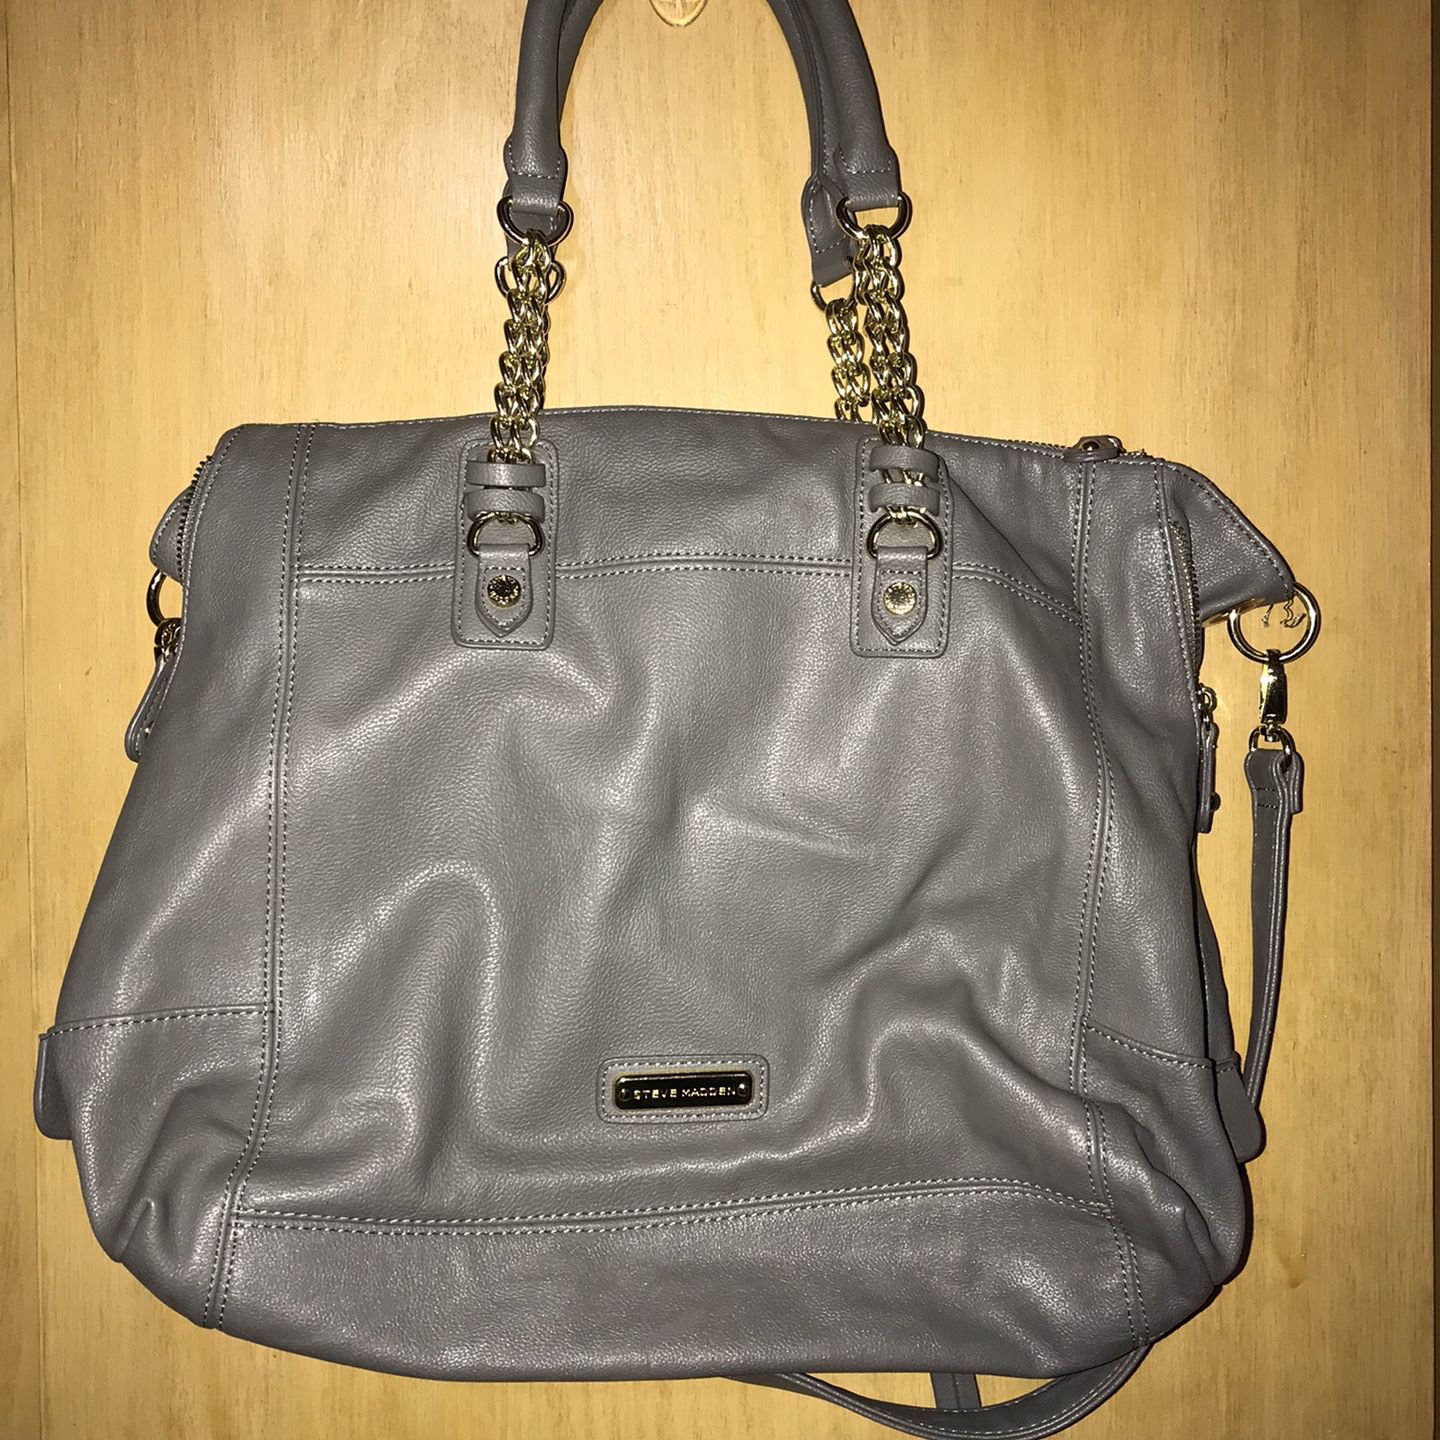 steve madden purse and shoes set for Sale in Chicago, IL - OfferUp